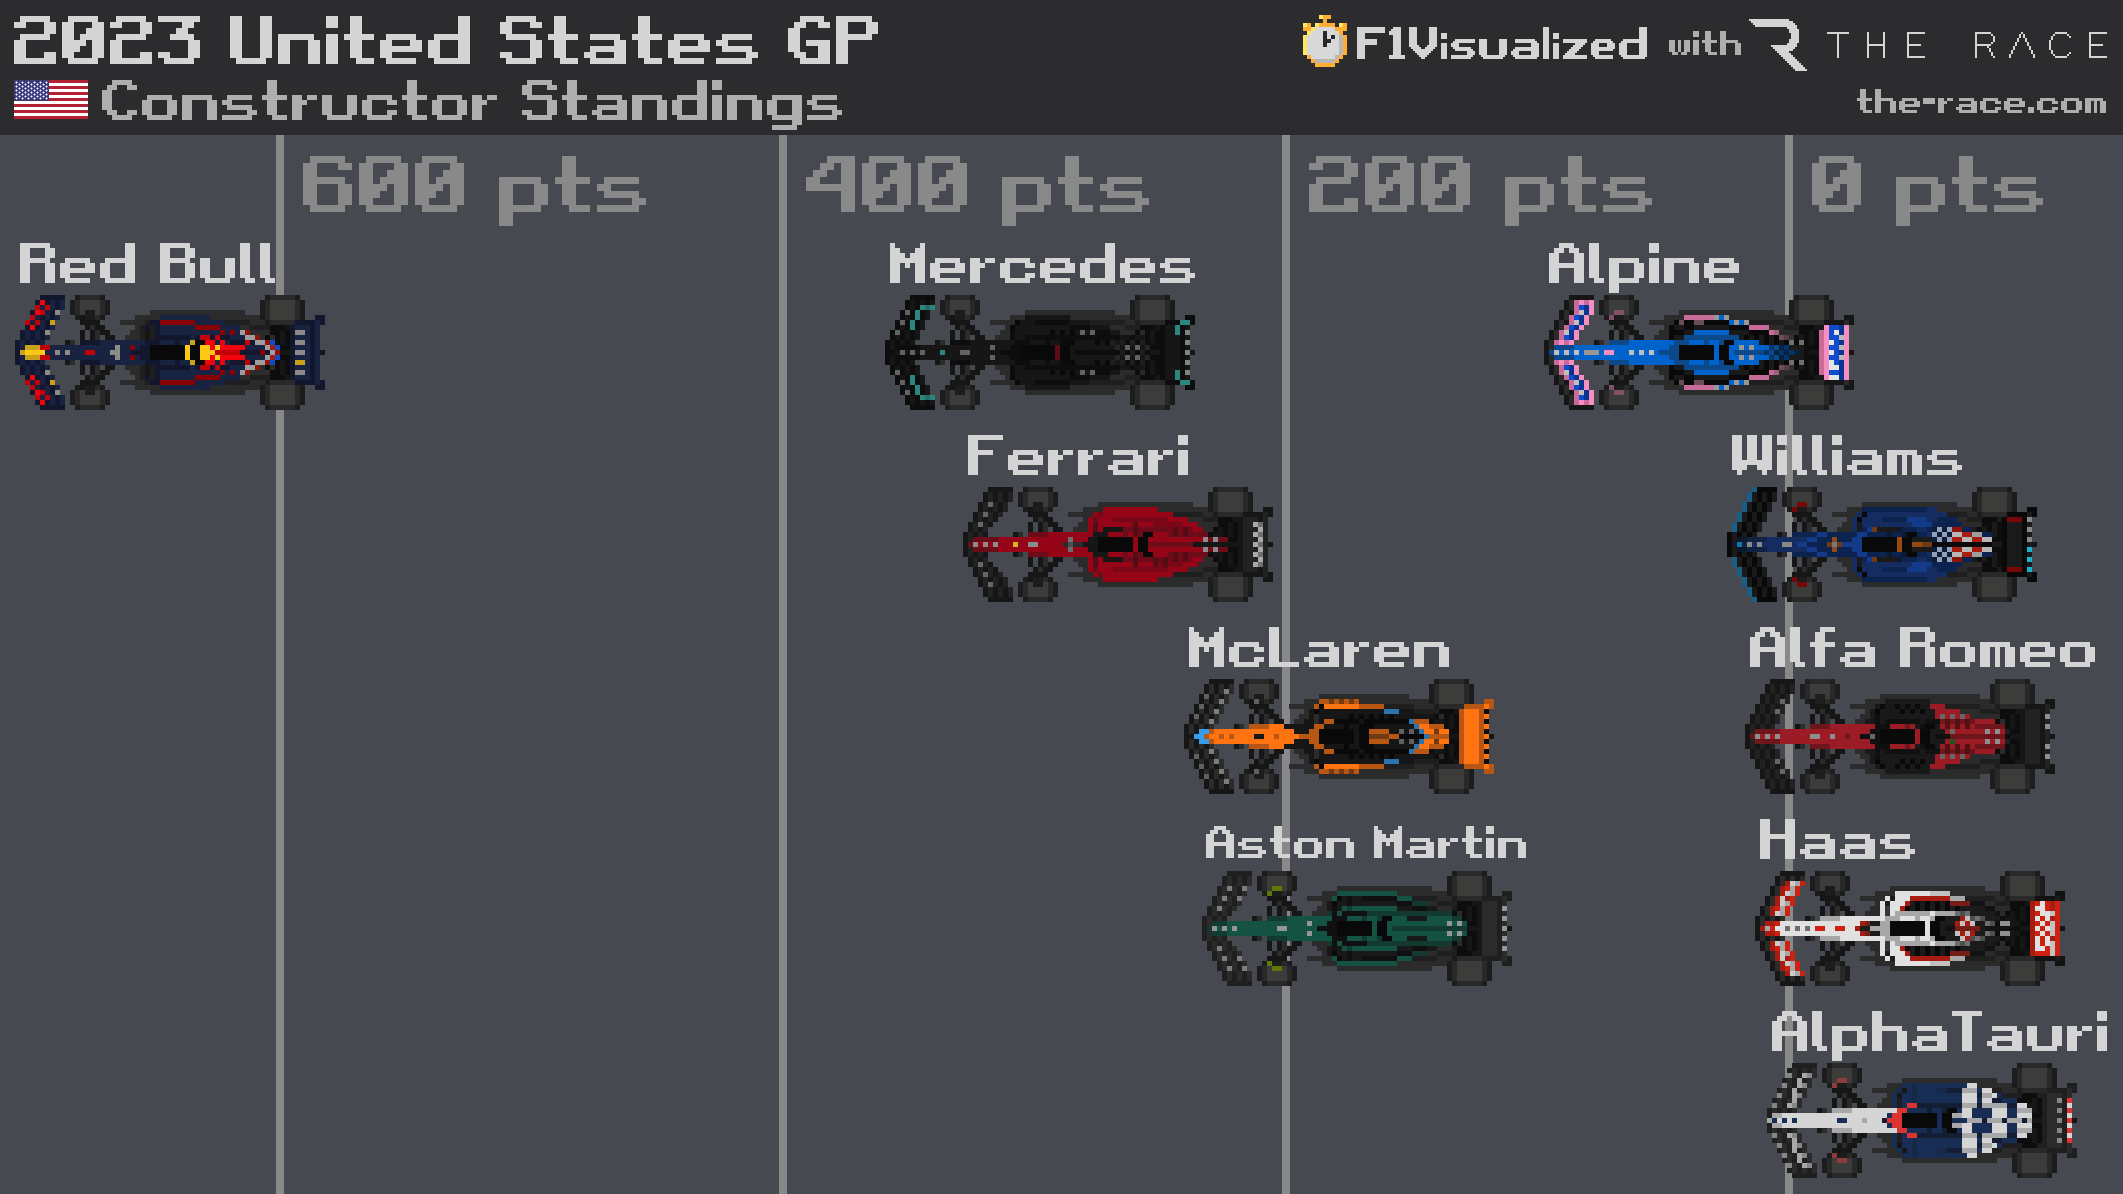 F1Visualized, US GP, F1 Constructors' Standings